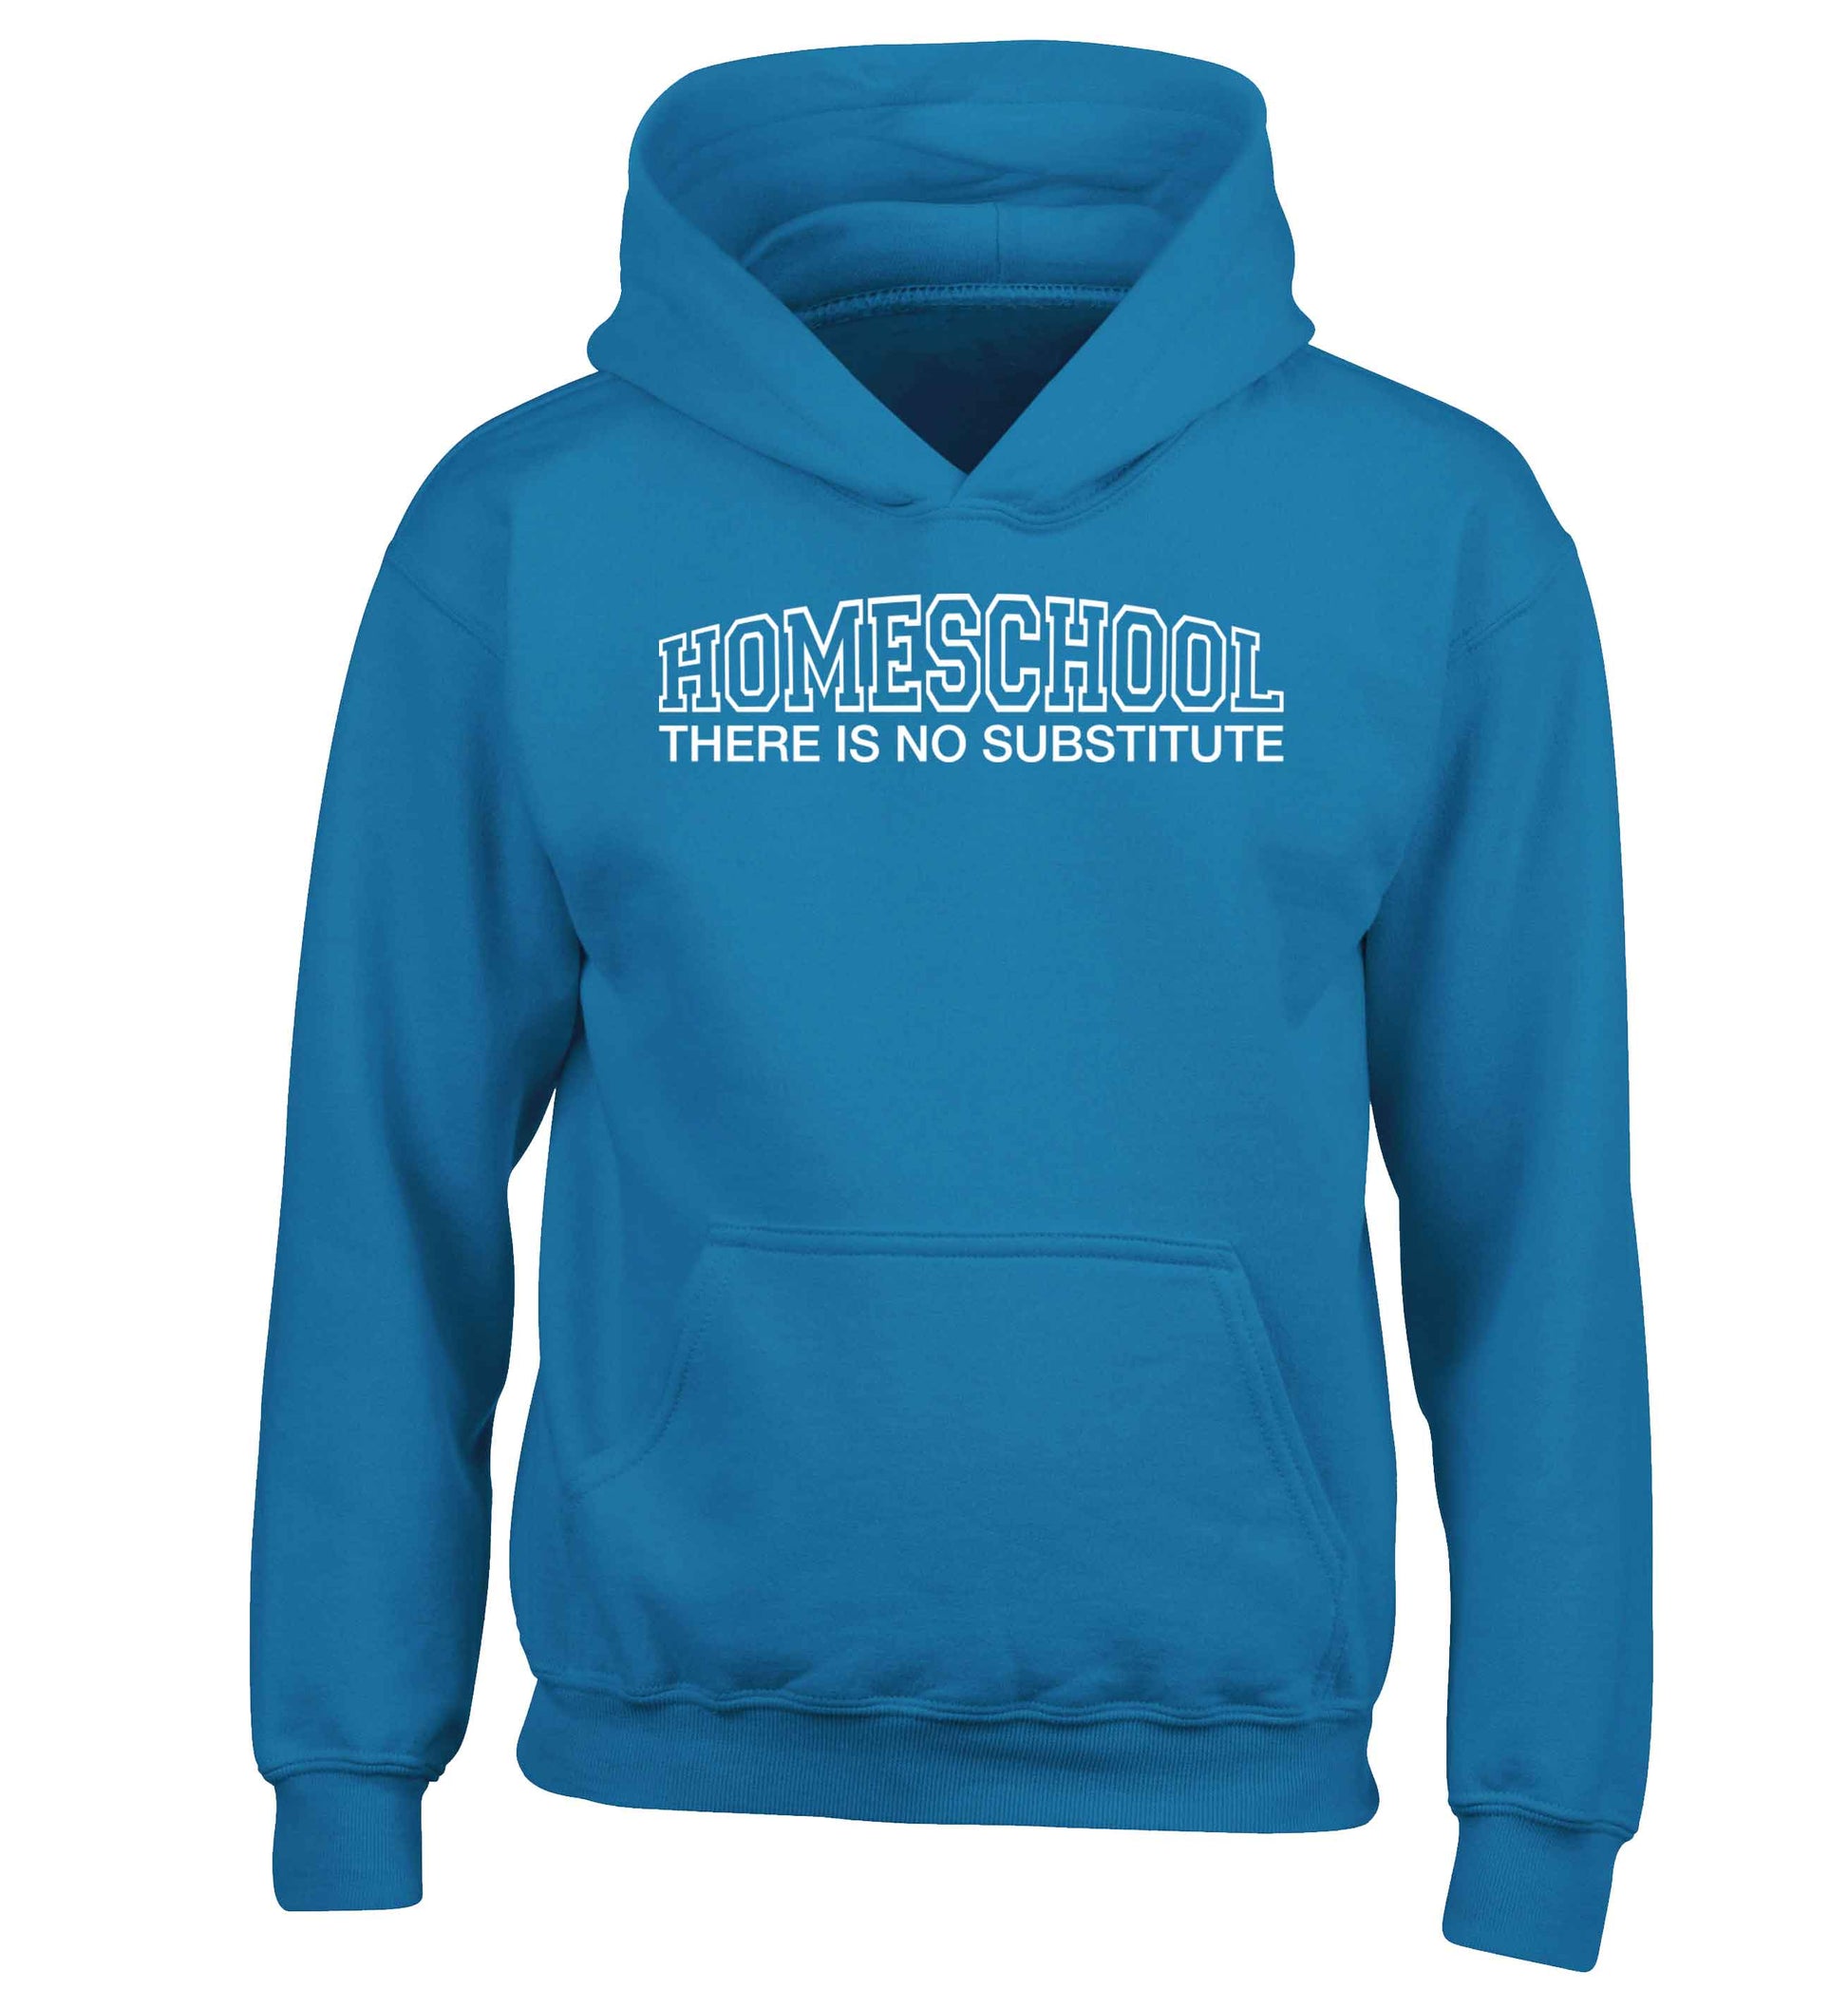 Homeschool there is not substitute children's blue hoodie 12-13 Years